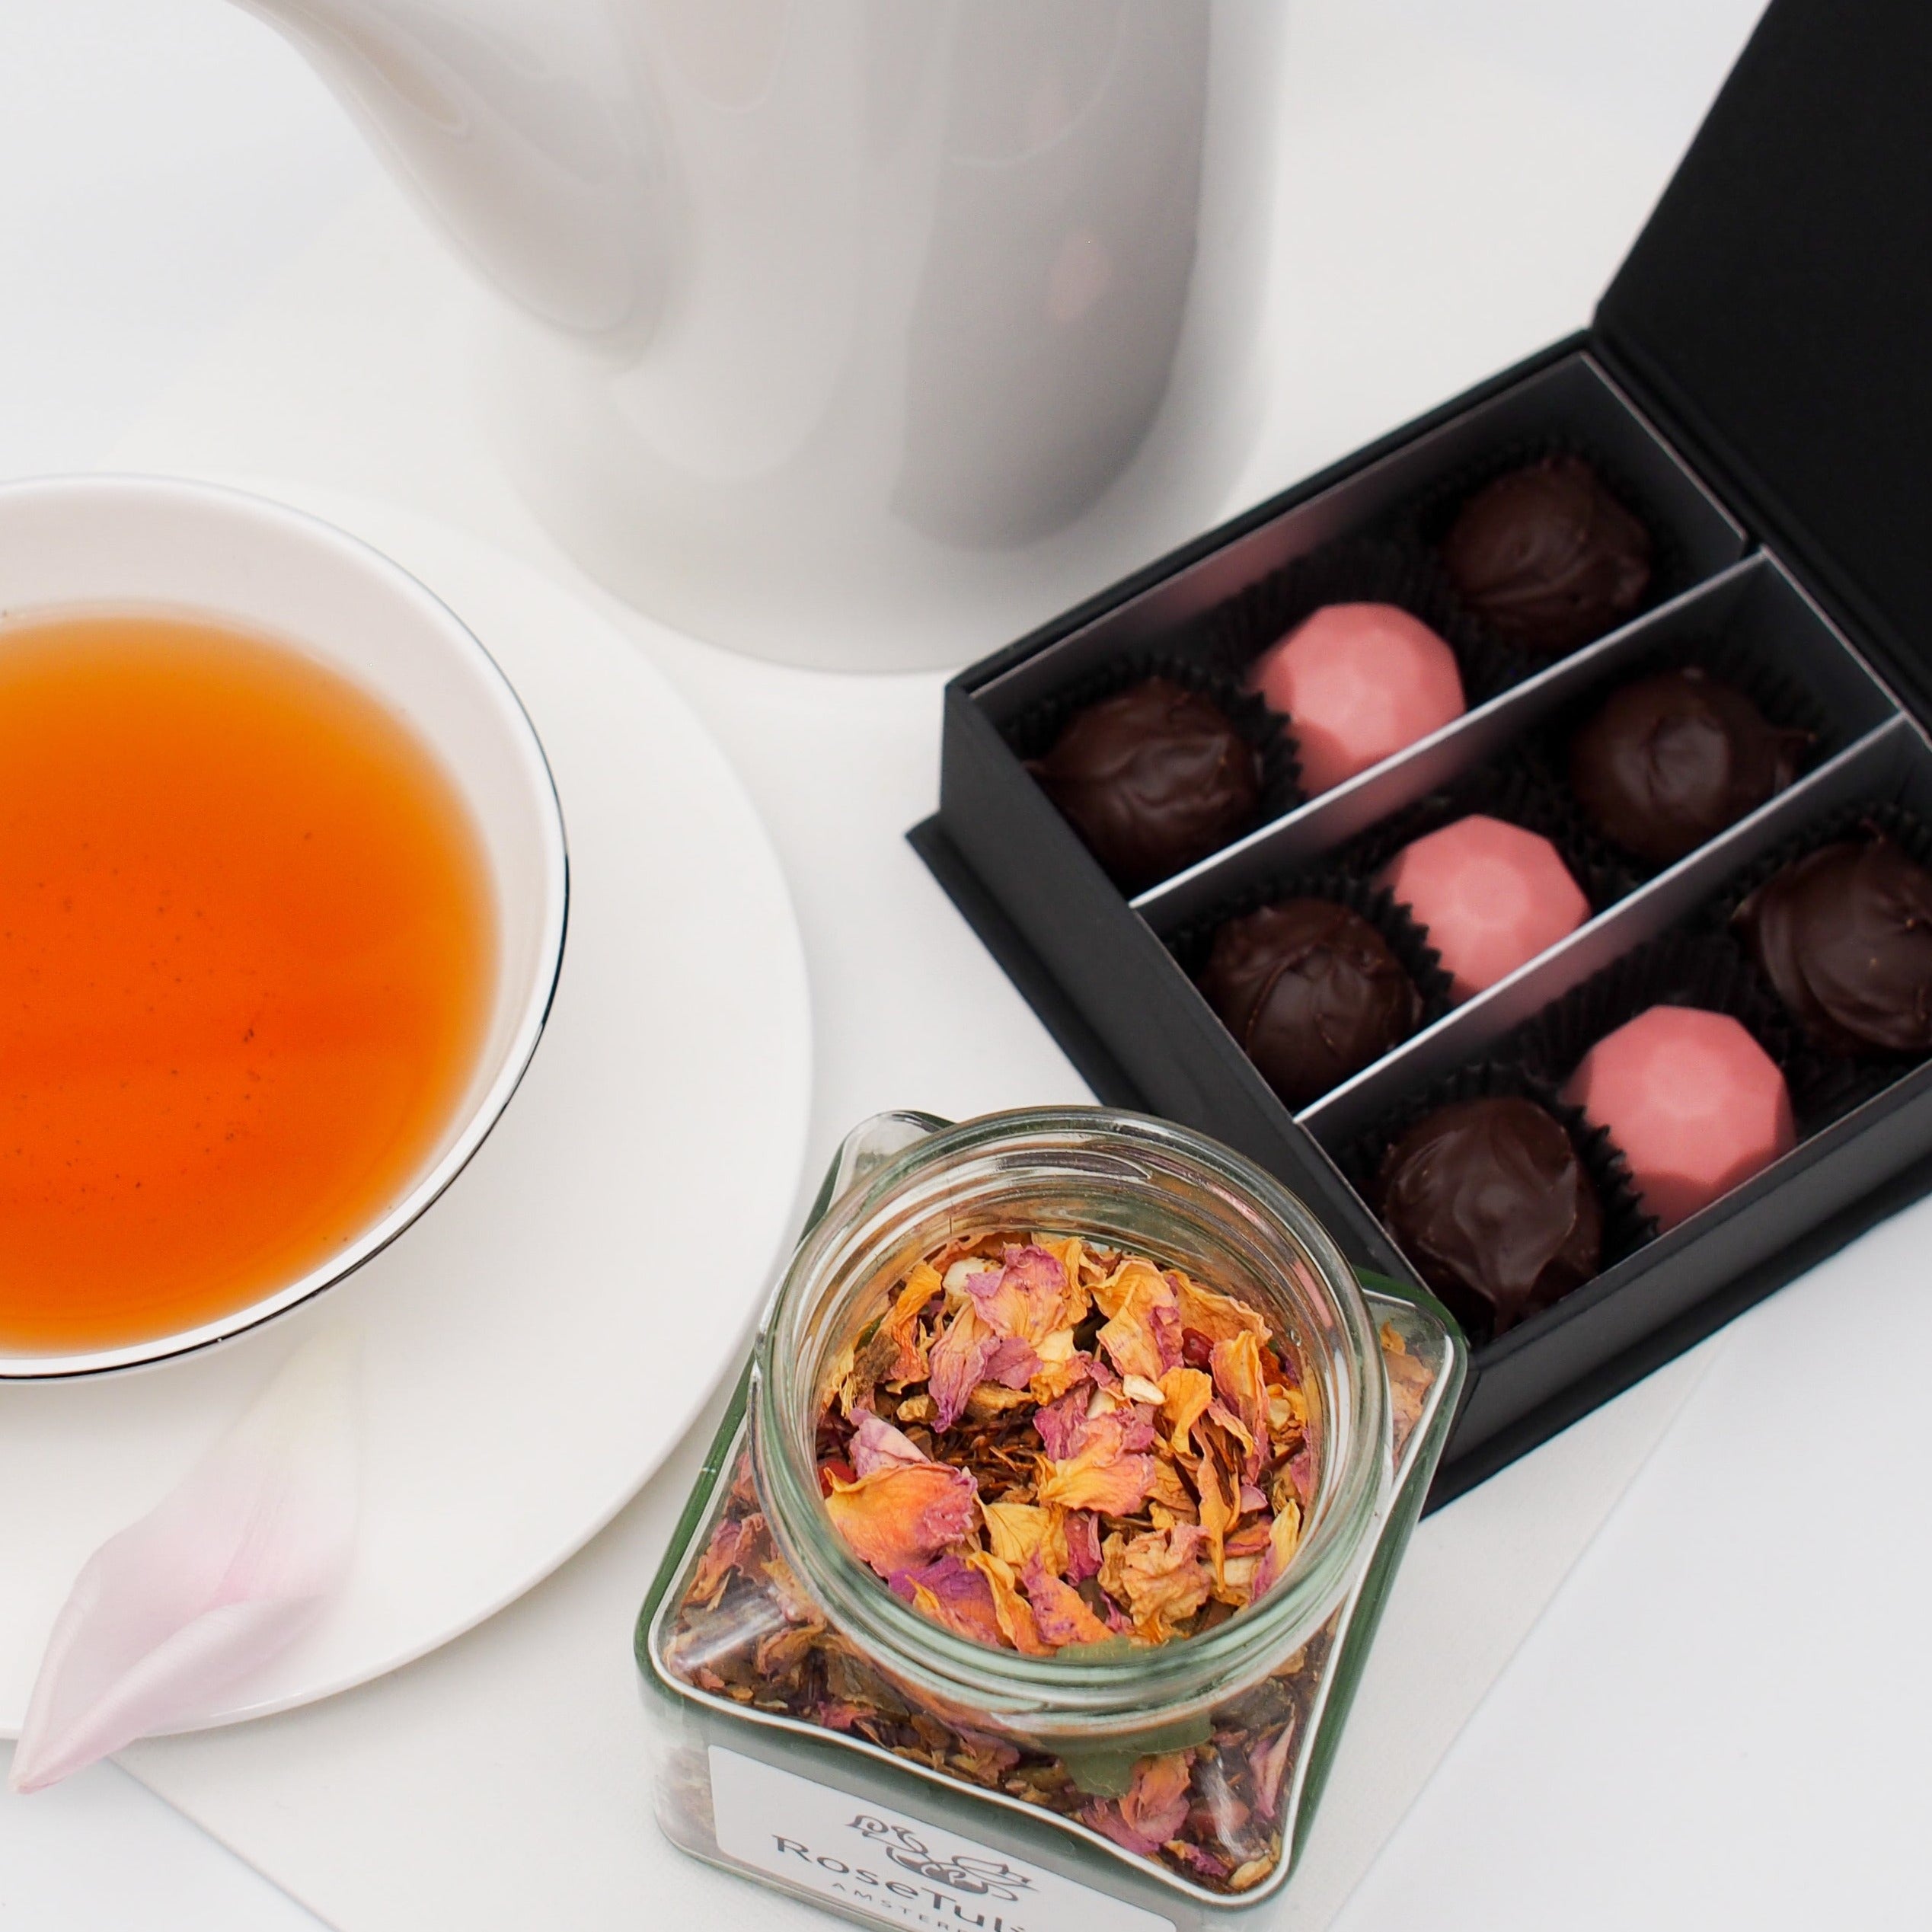 These delicious pralines perfectly complement the herbal flower tea, creating a truly gourmet experience that is sure to satisfy even the most discerning of tea lovers. Enjoy the sweet and fragrant aroma of our herbal tea, and indulge in the creamy texture of our pralines for an indulgent experience that will tantalise your taste buds.